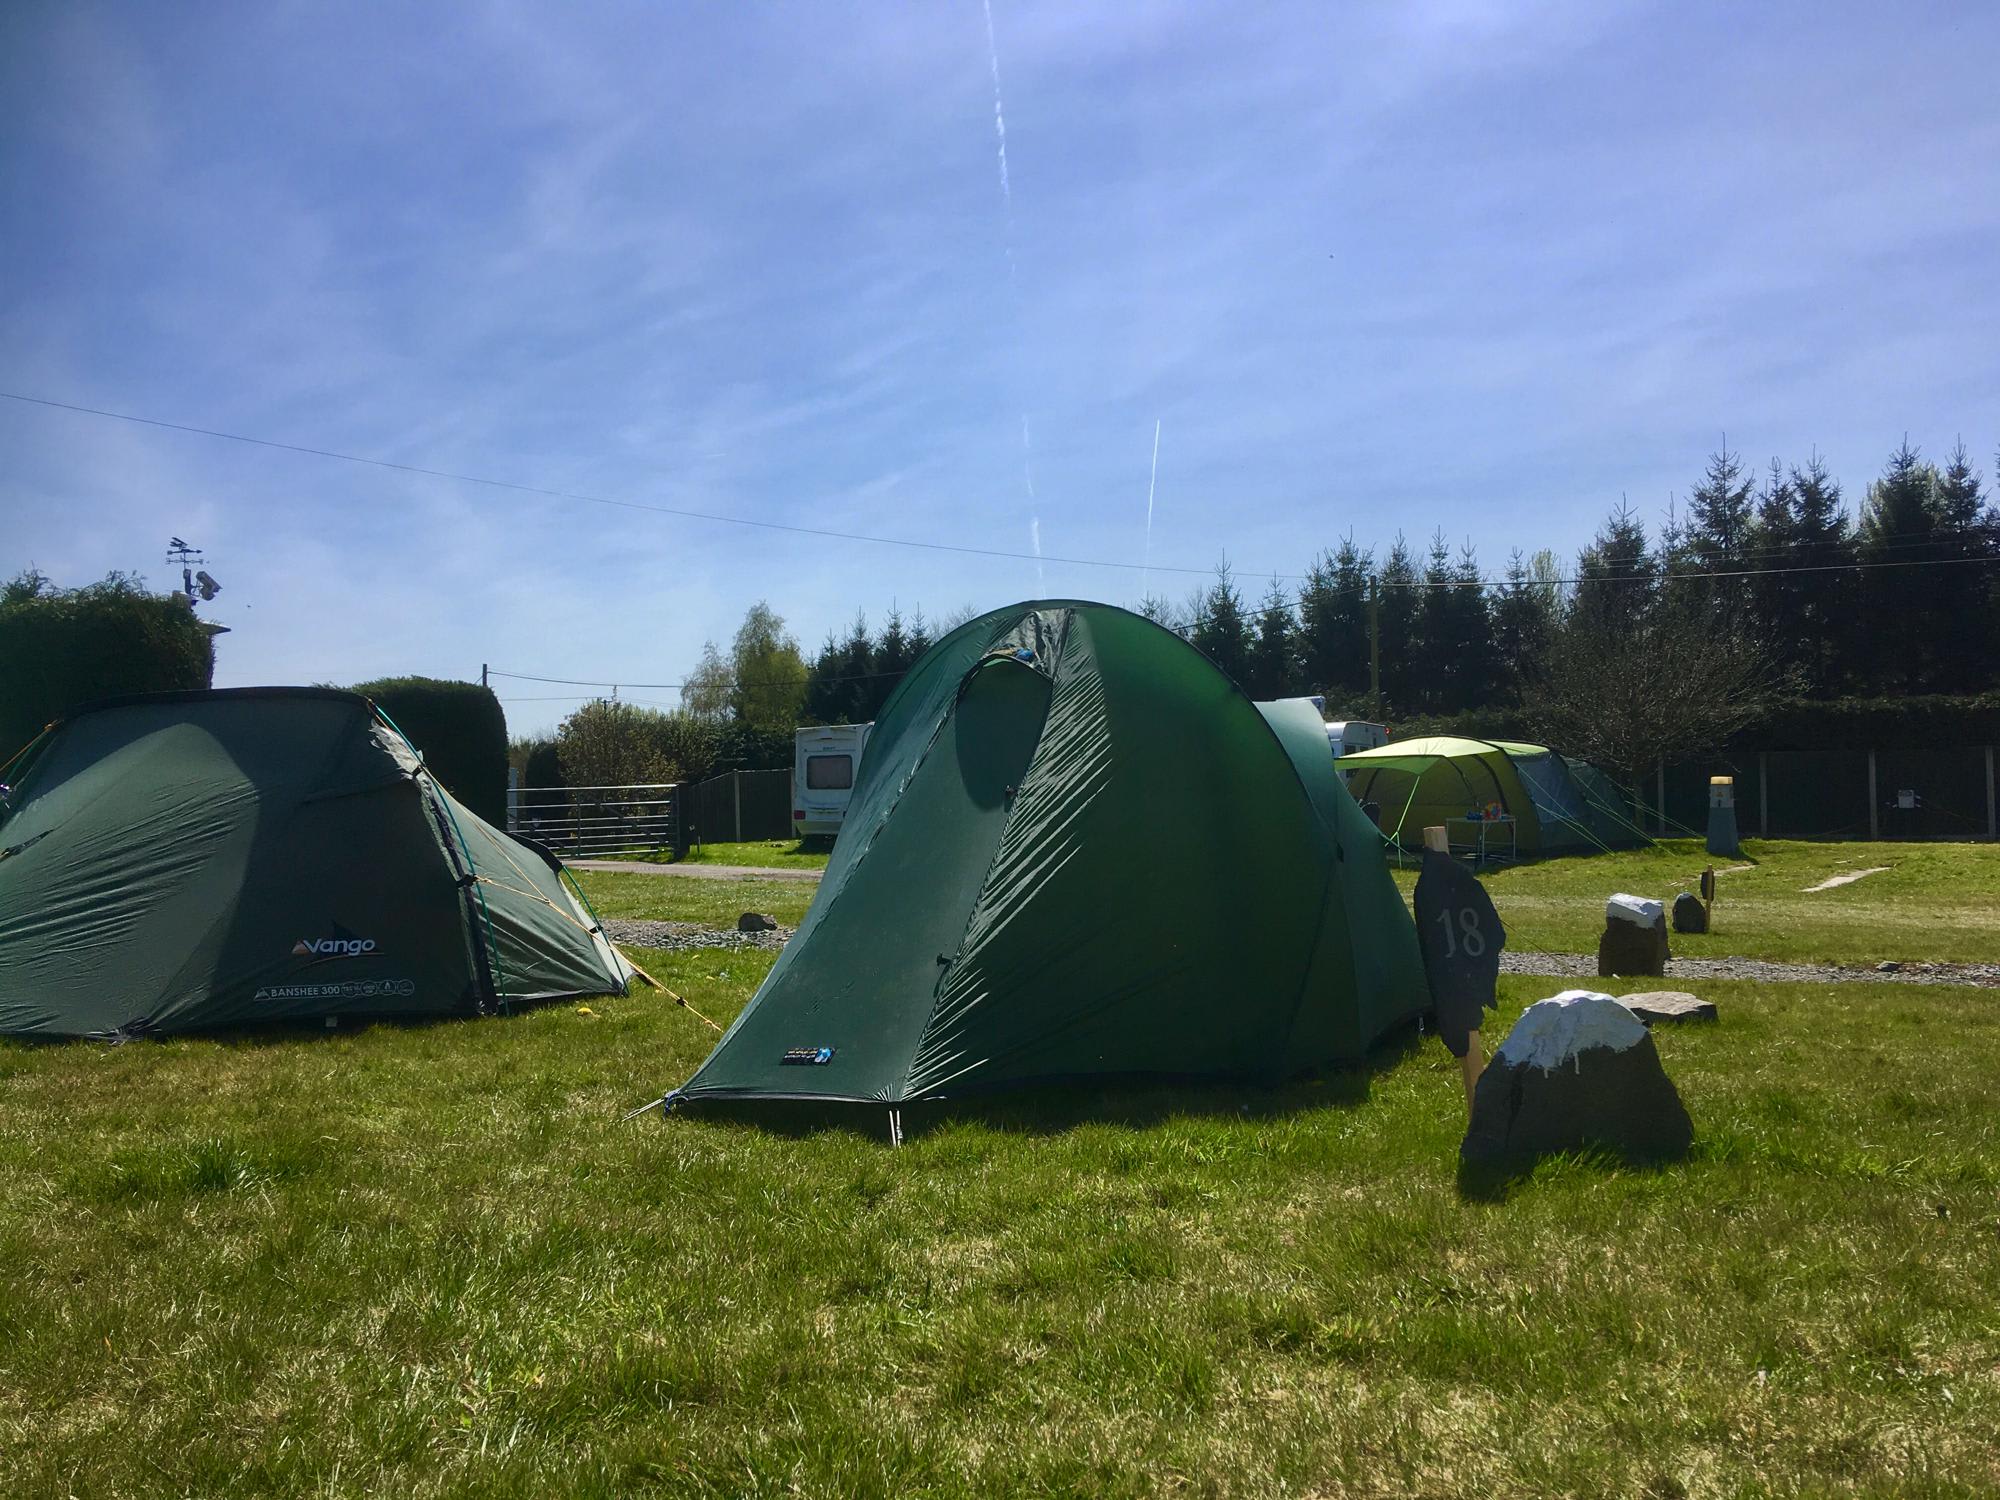 Traditional, old school camping for lovers of the great outdoors, appropriately set beside an old school in the Shropshire Hills.